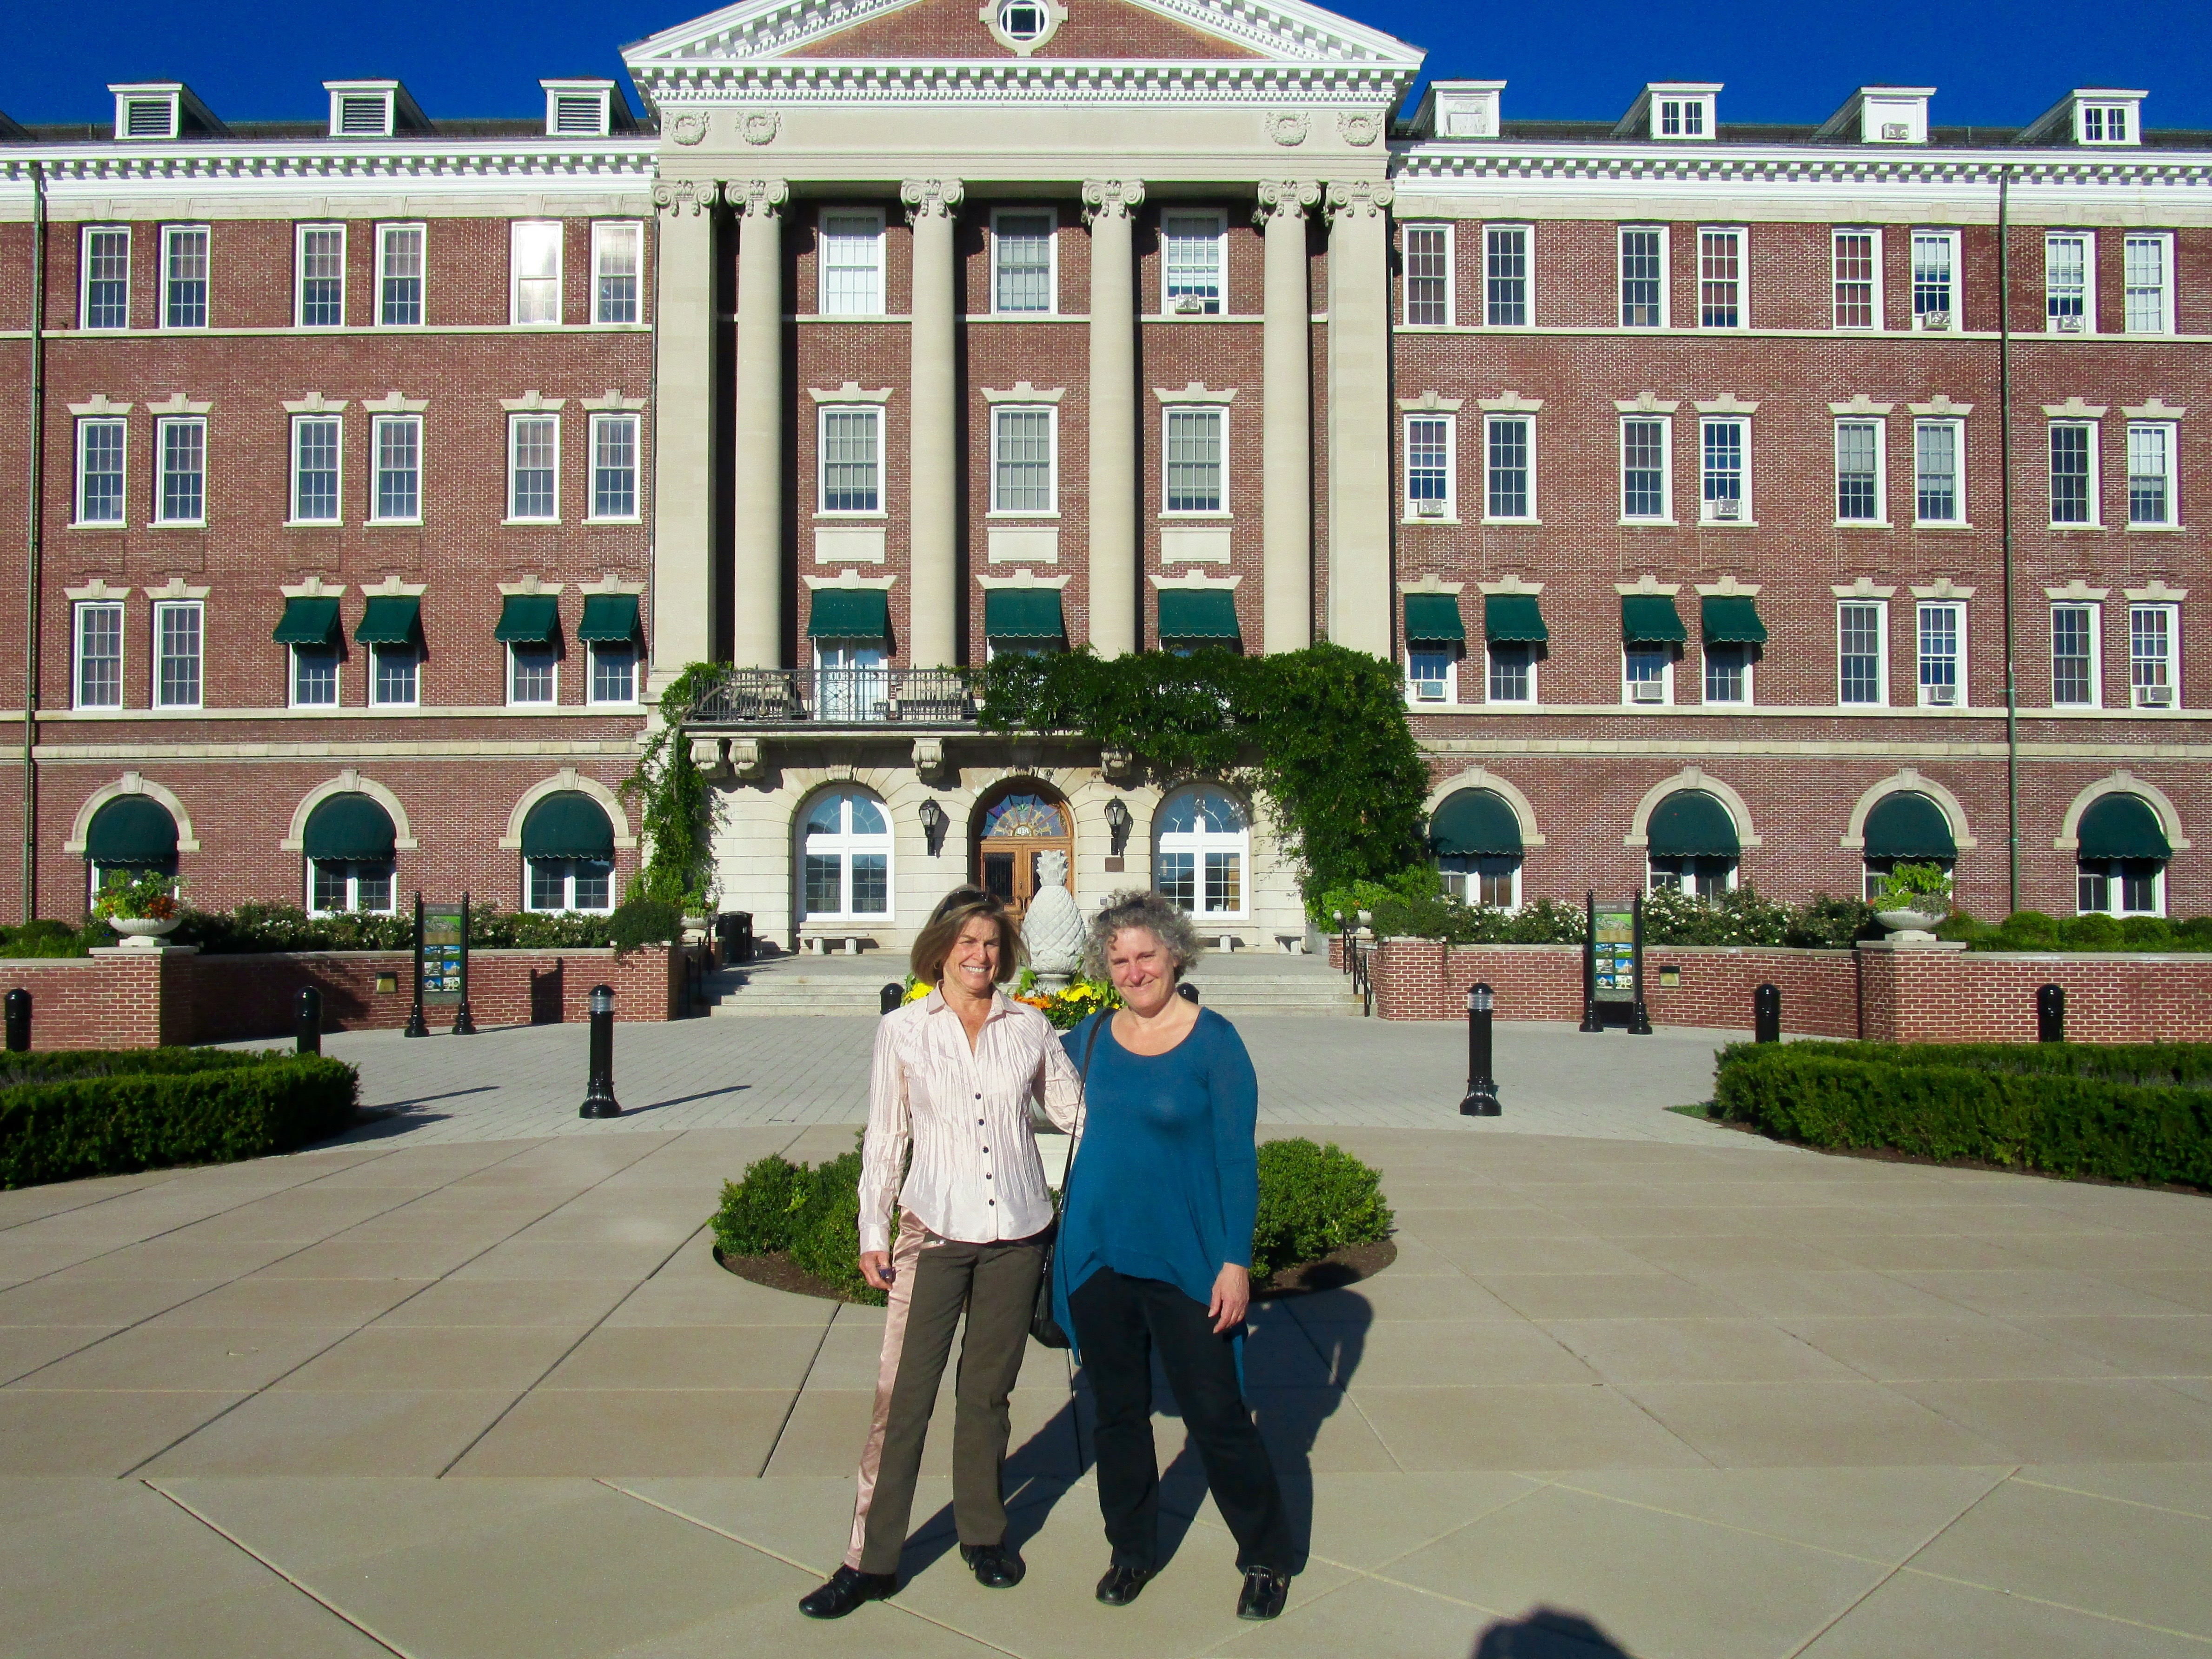 BETSY AND I RETURNED ON THE NEXT DAY TO TOUR THE VERY BEAUTIFUL CIA CAMPUS.